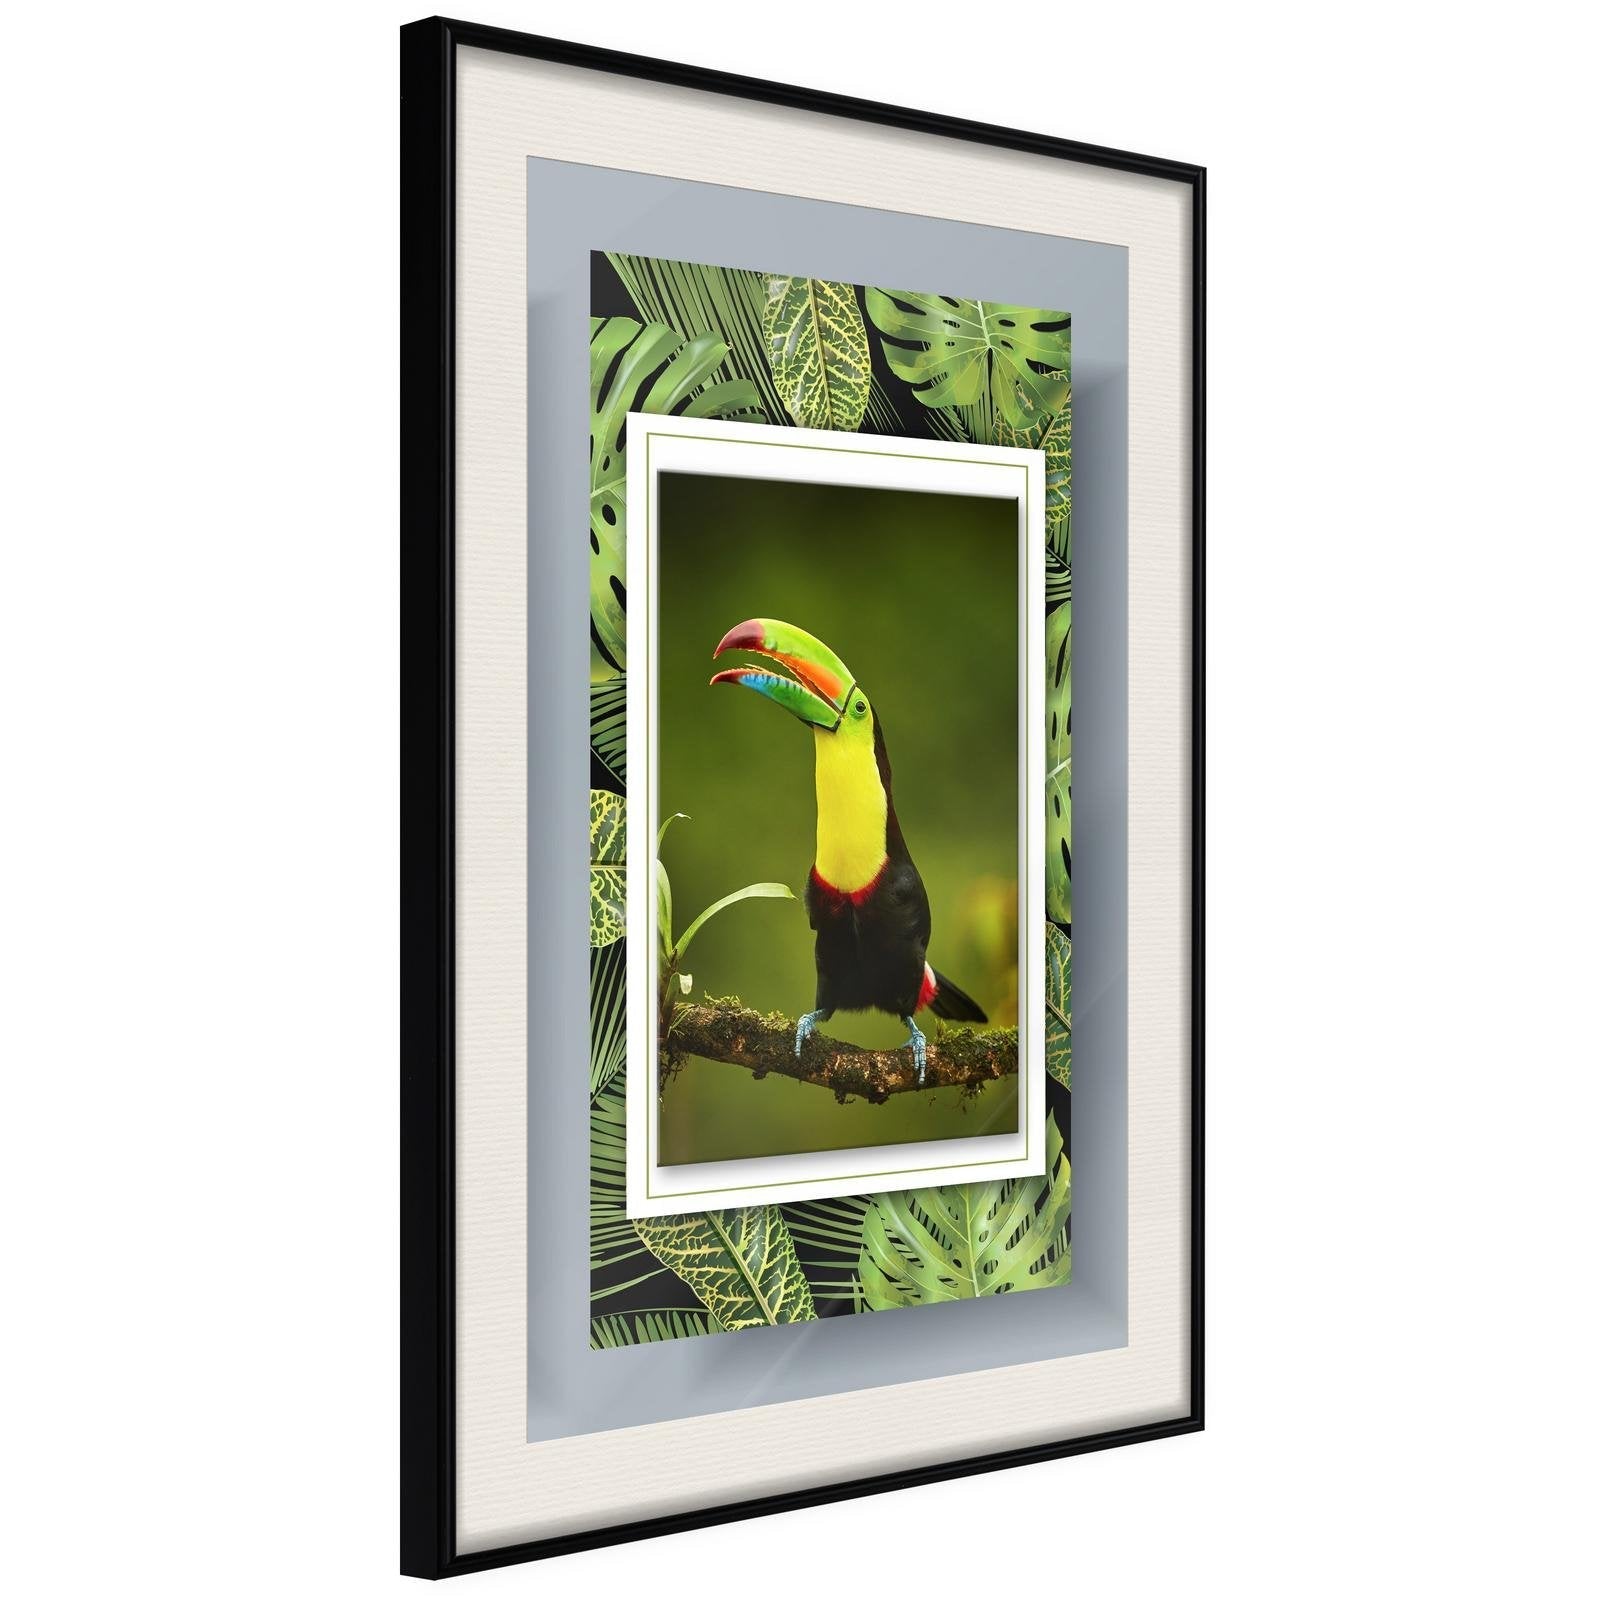 Inramad Poster / Tavla - Toucan in the Frame-Poster Inramad-Artgeist-20x30-Svart ram med passepartout-peaceofhome.se